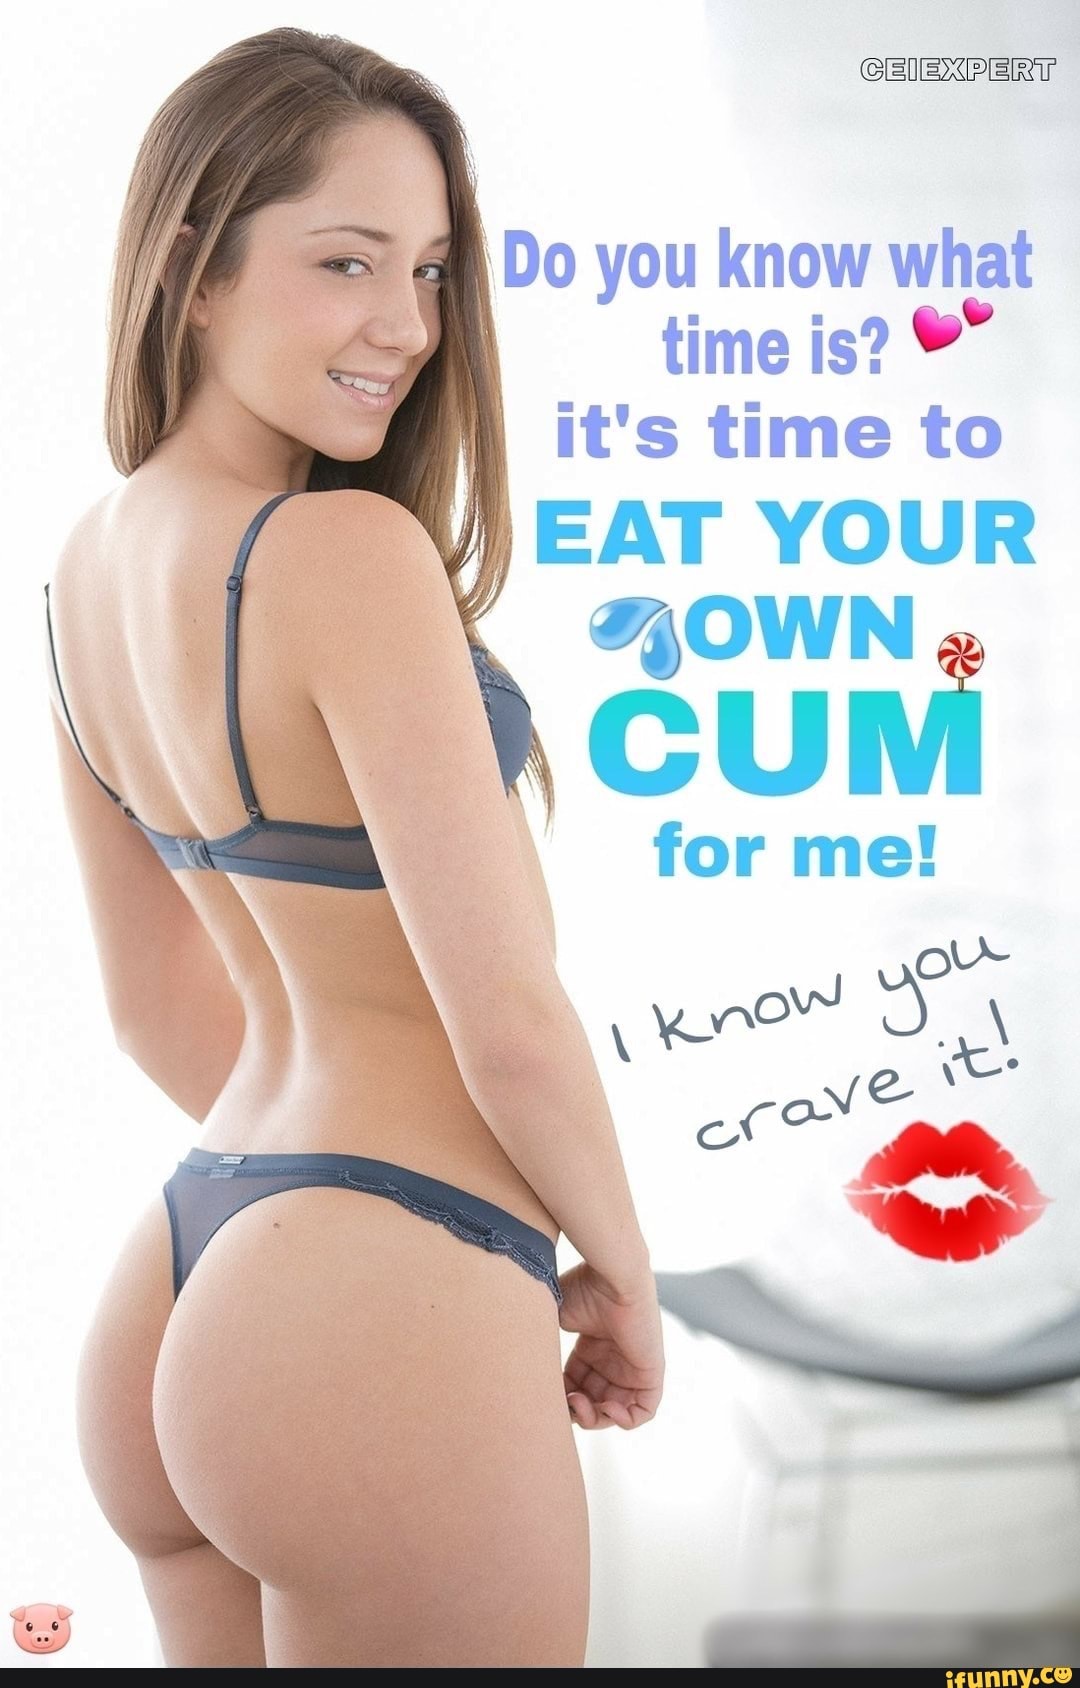 CEIEXPERT Do you know what time is? it's time to I EAT YOUR CUM for me...